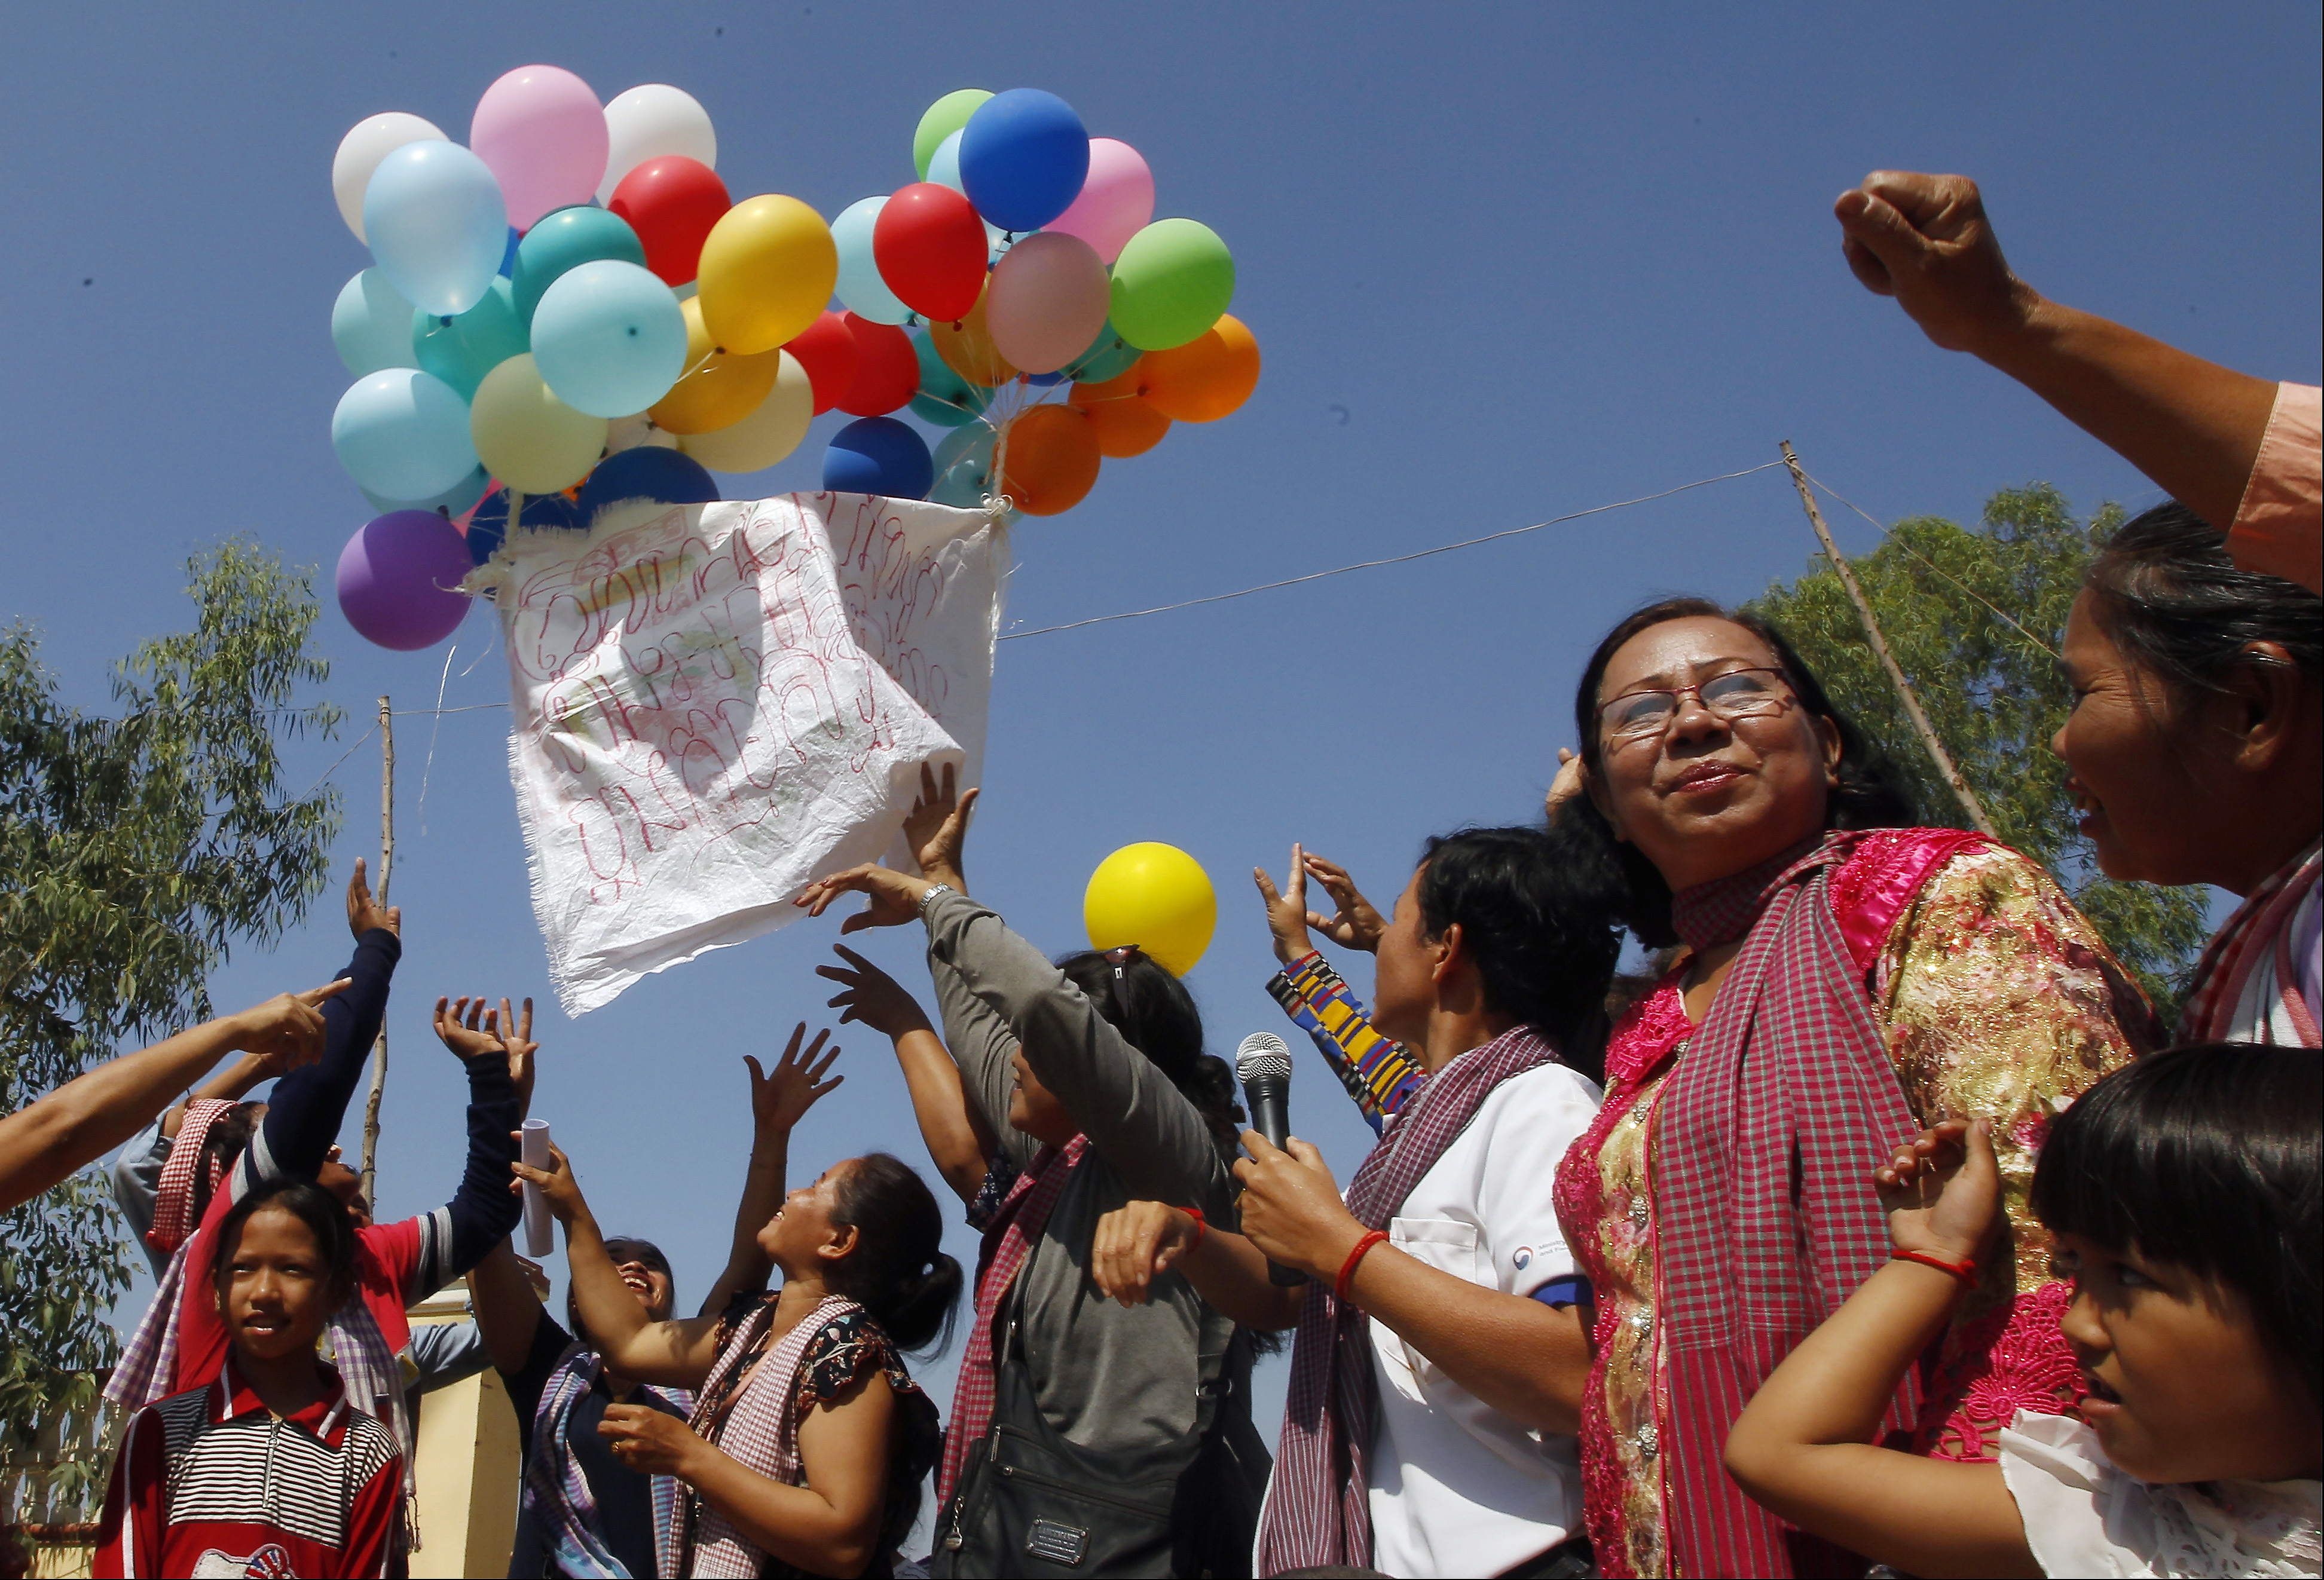 Land activists from Boeung Chhuk community release balloons to mark International Women's Day on the outskirts of Phnom Penh, Cambodia, Thursday, March 8, 2018. The community people took part in the International Women's Day celebration, coincided with the 10th anniversary of their forced eviction. (AP Photo/Heng Sinith)